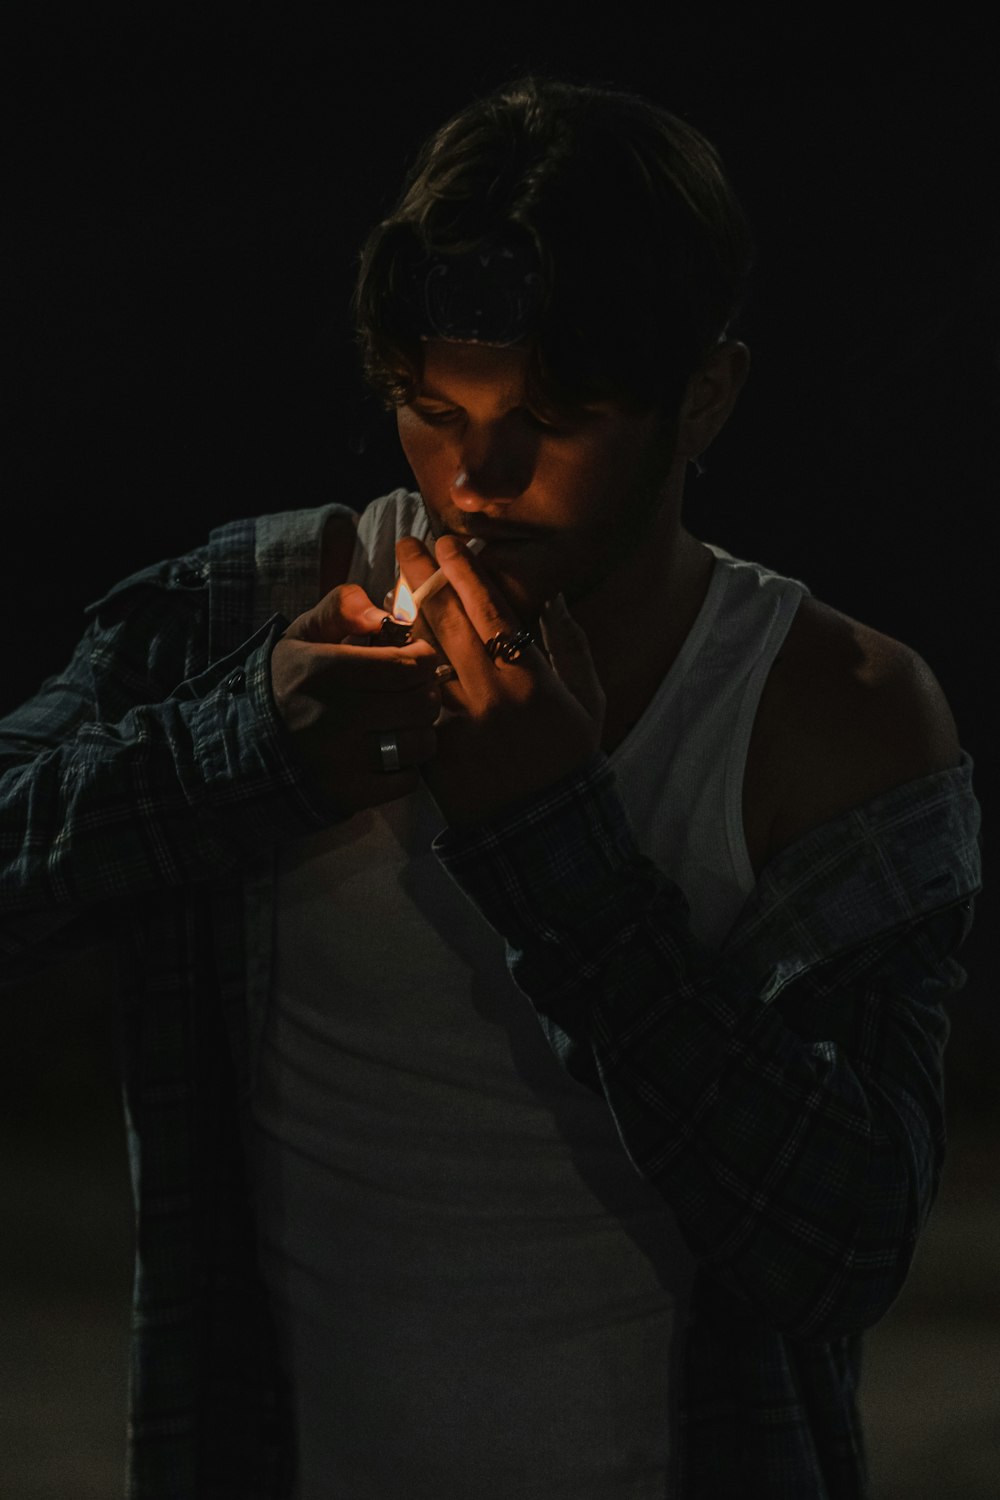 man in white tank top and black and gray plaid jacket smoking cigarette